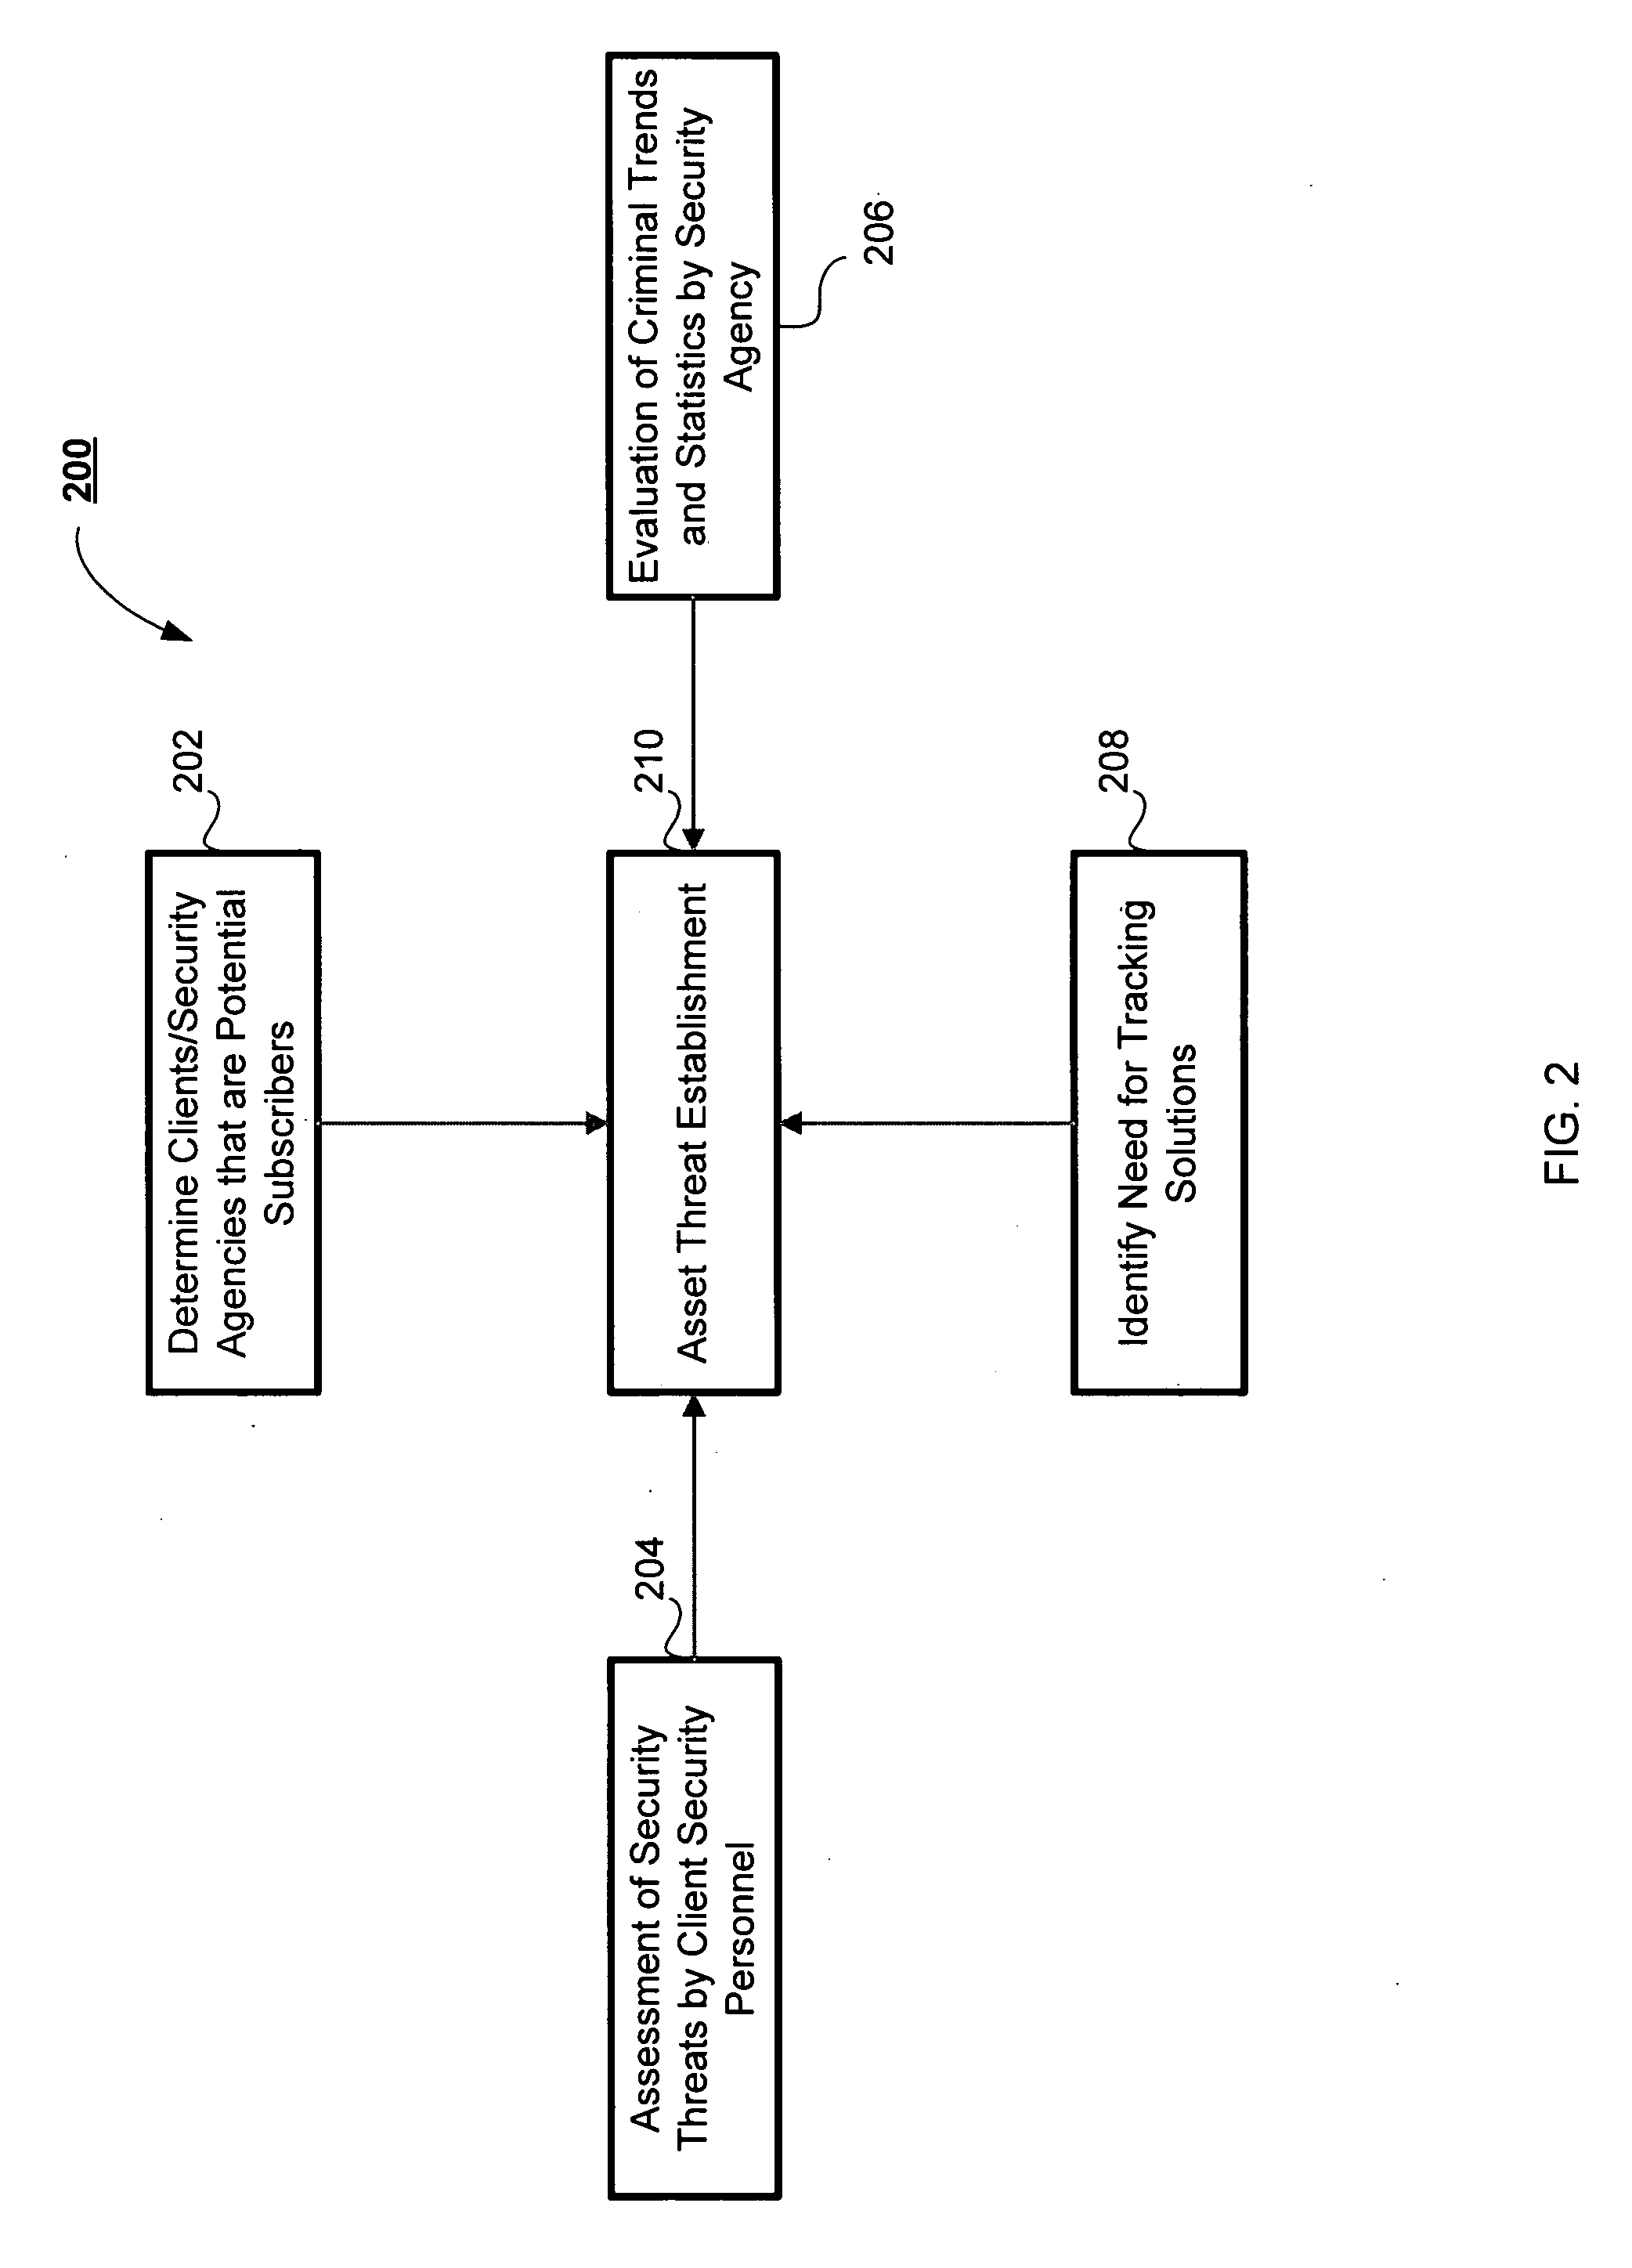 Method and system for providing tracking services to locate an asset